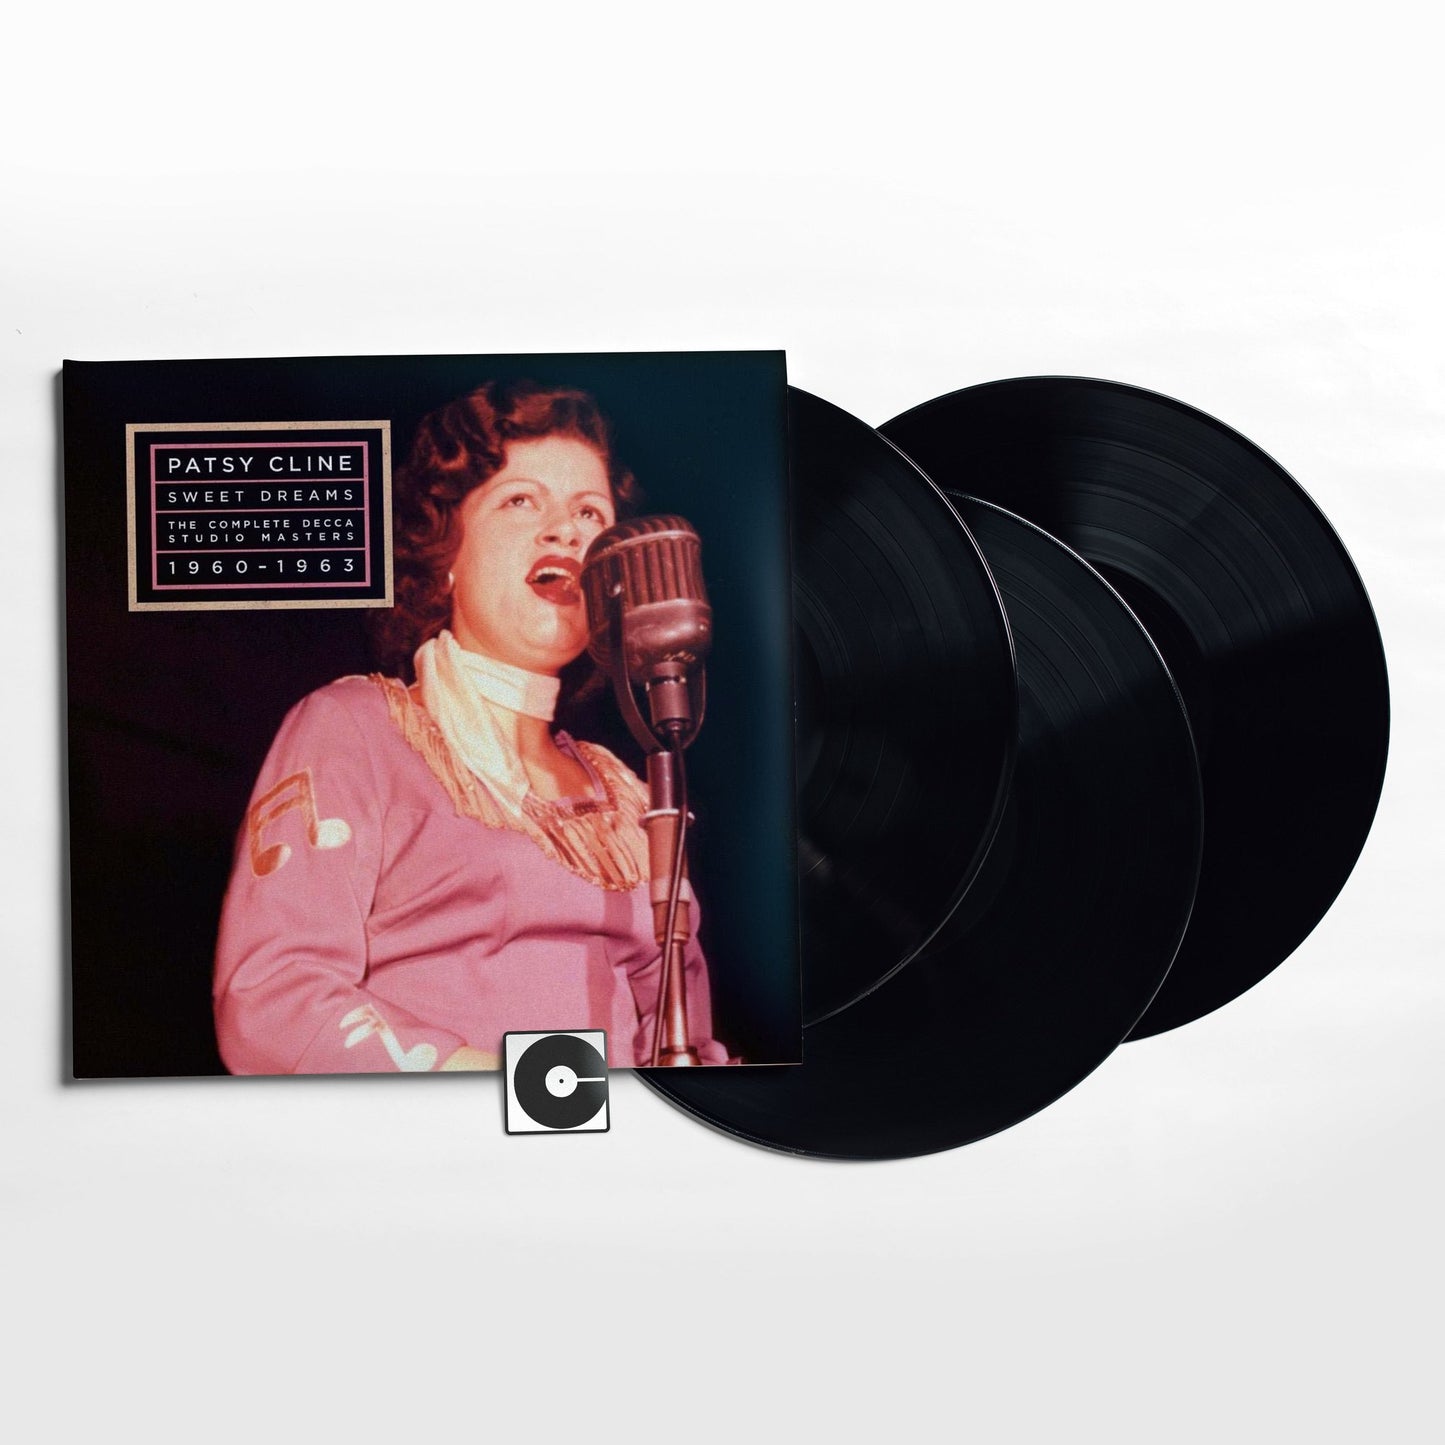 Patsy Cline - "Sweet Dreams: The Complete Decca Masters 1960-1963"